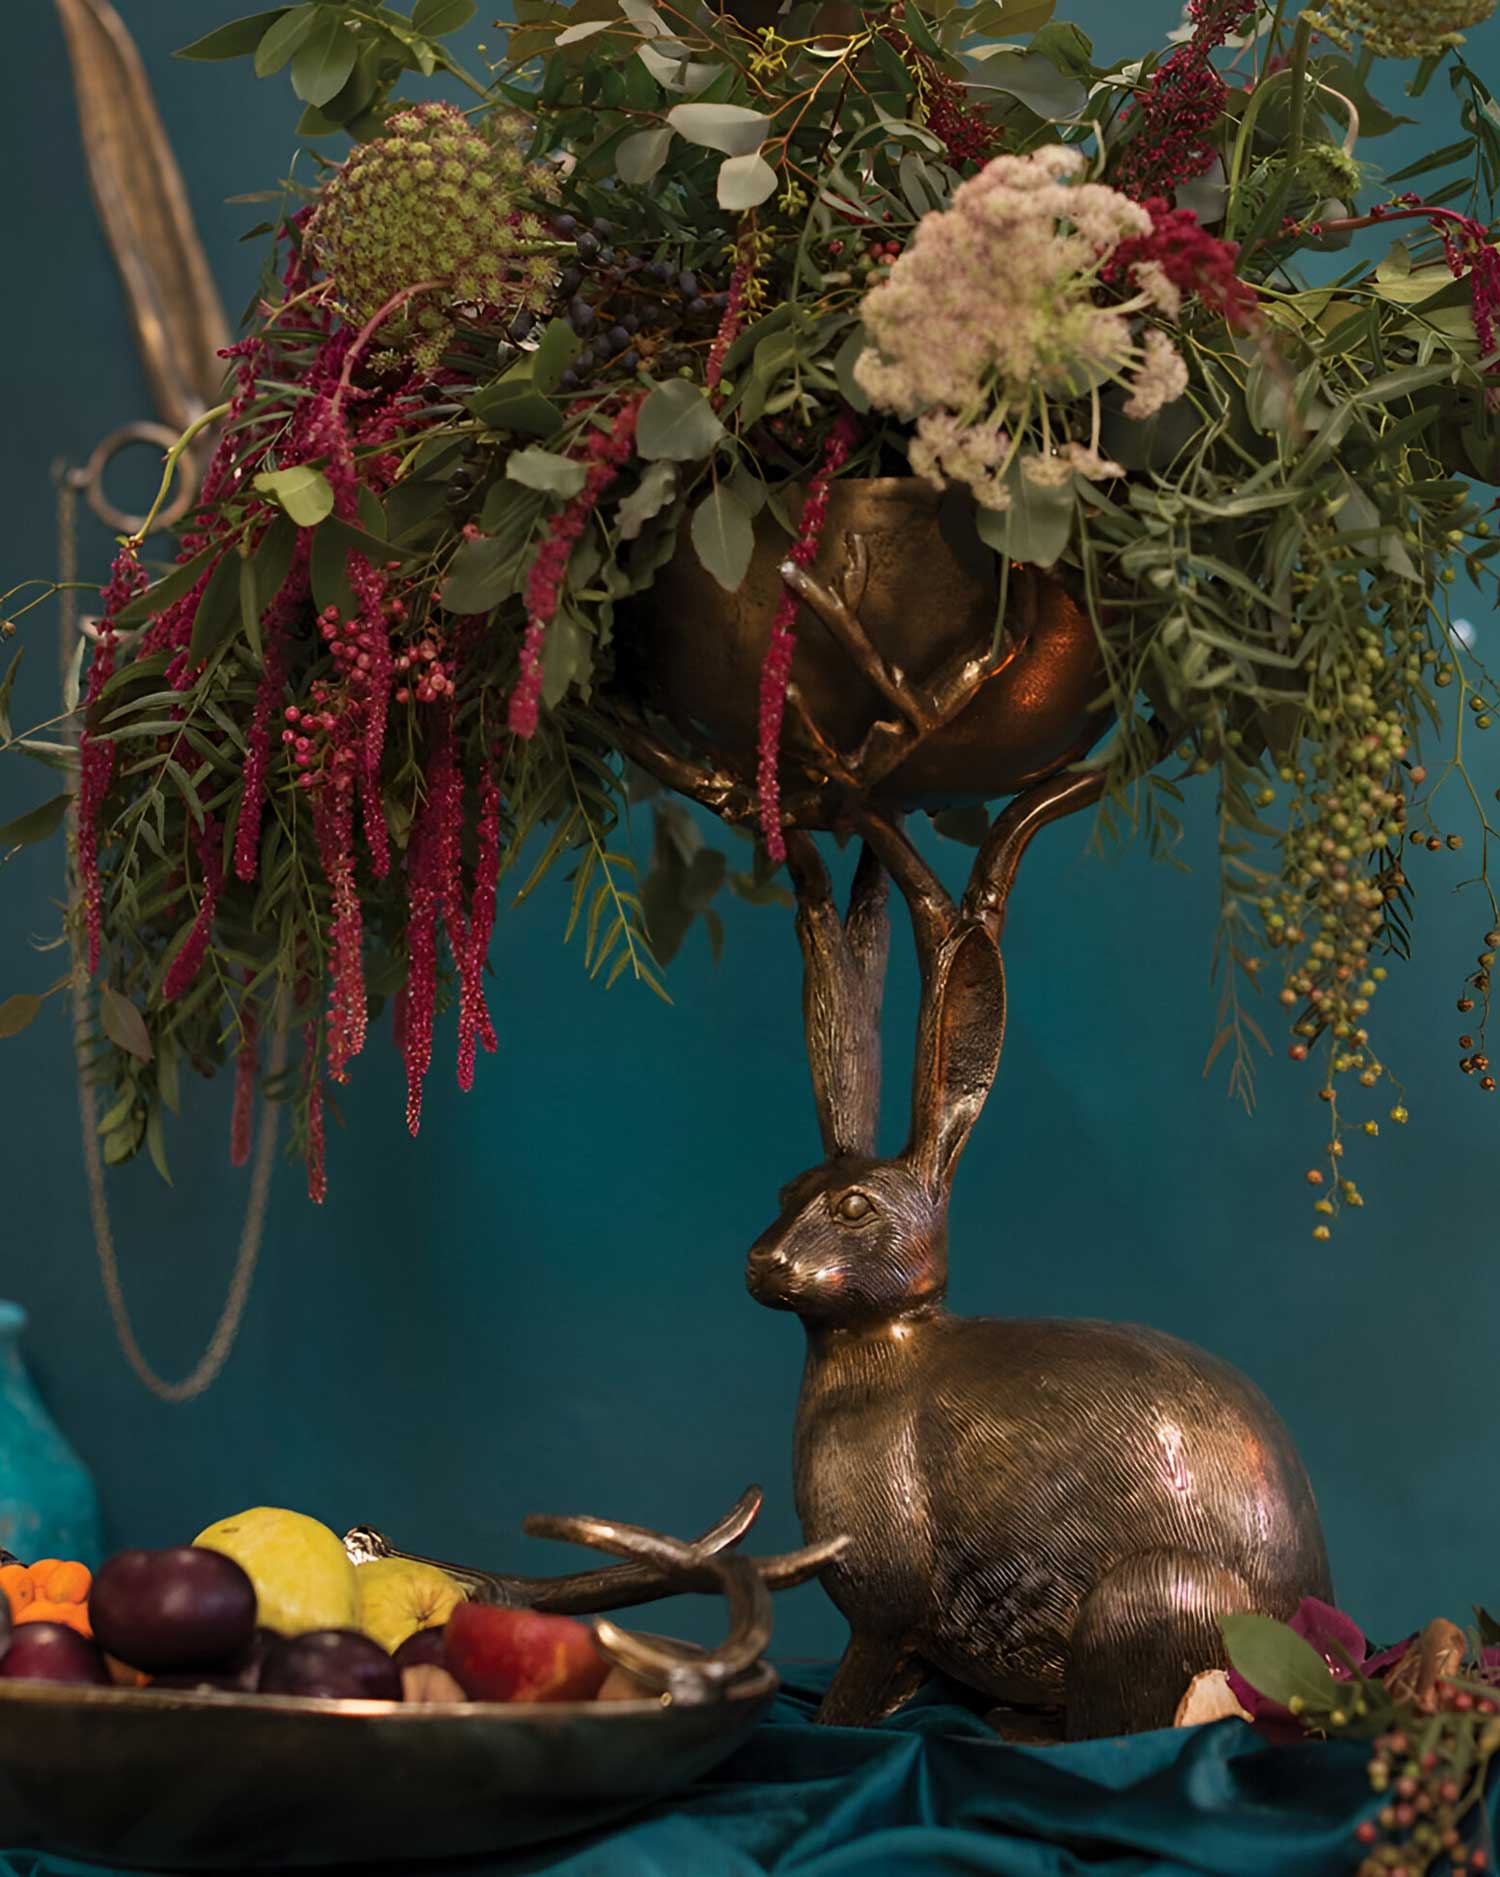 Fantastical Hare Branch Bowl filled with flowers on a table